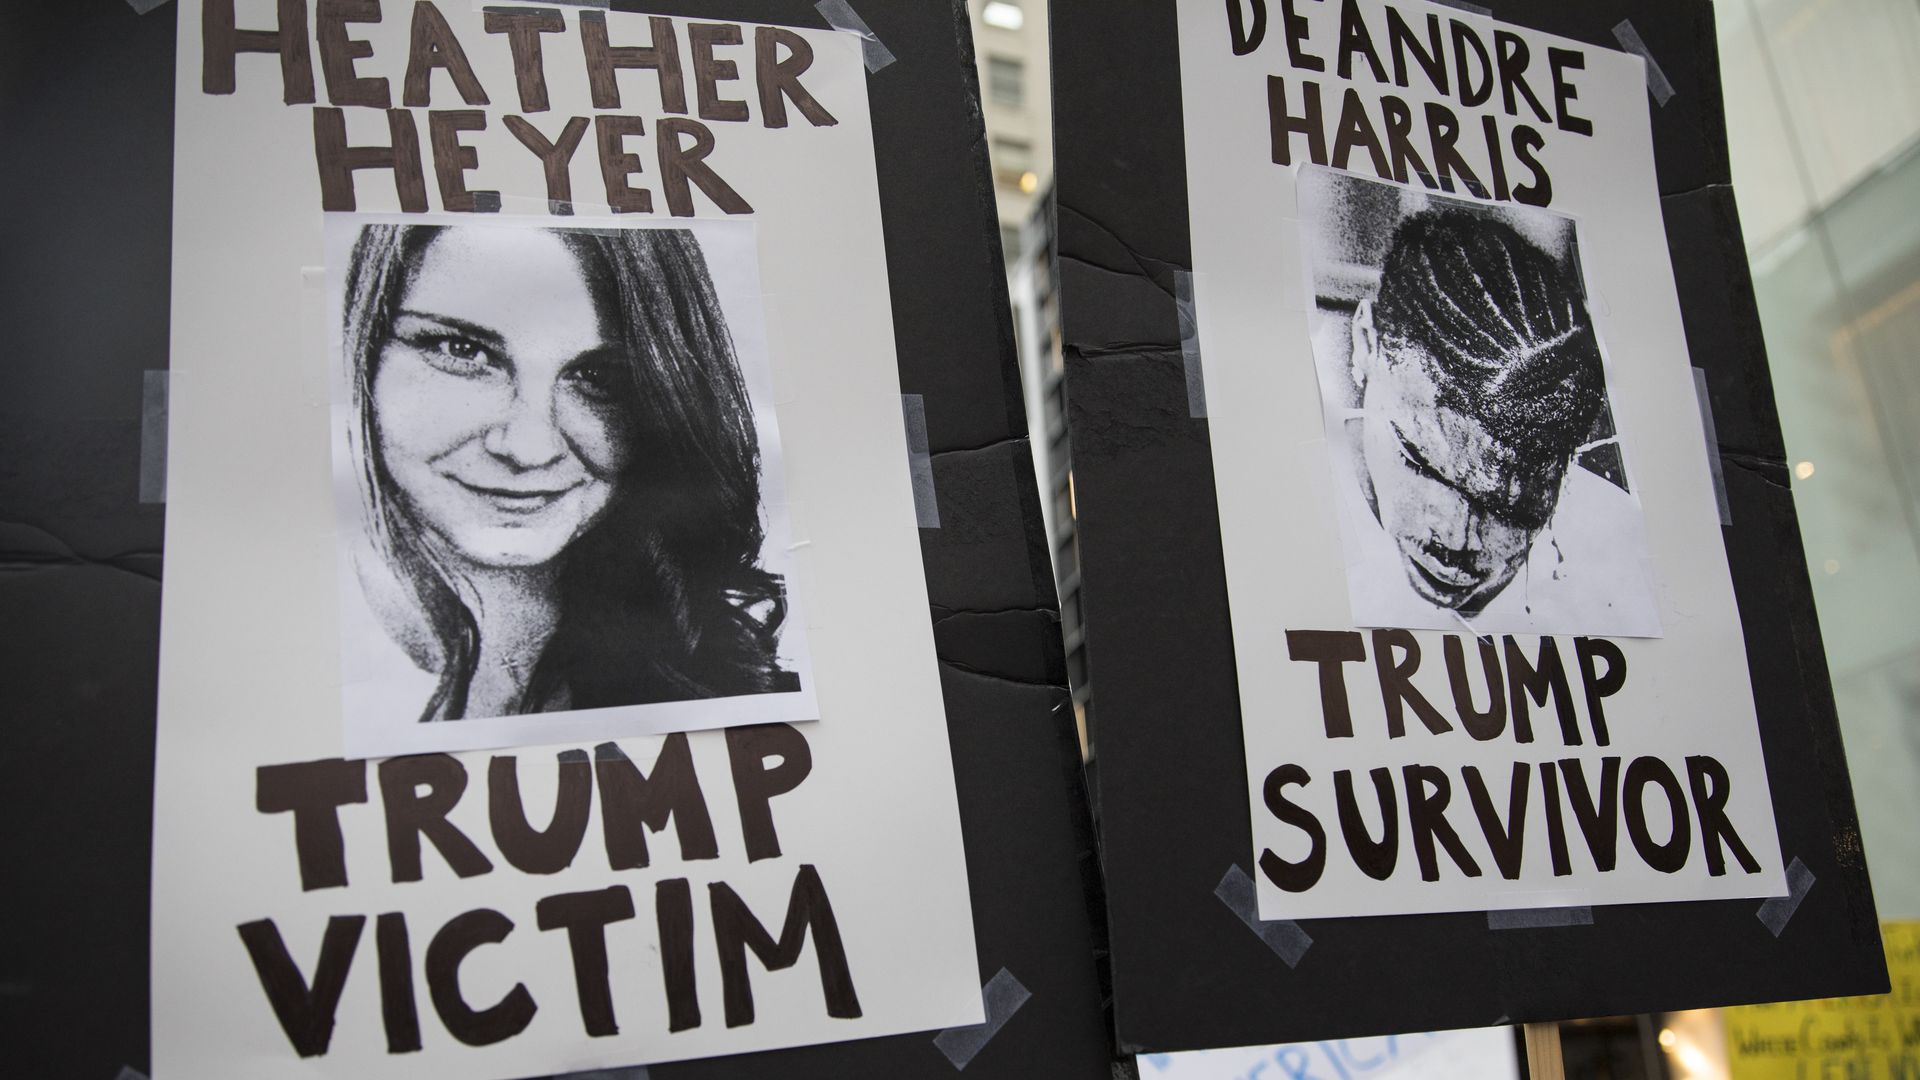 protest signs with images of Heather Heyer and Deandre Harris